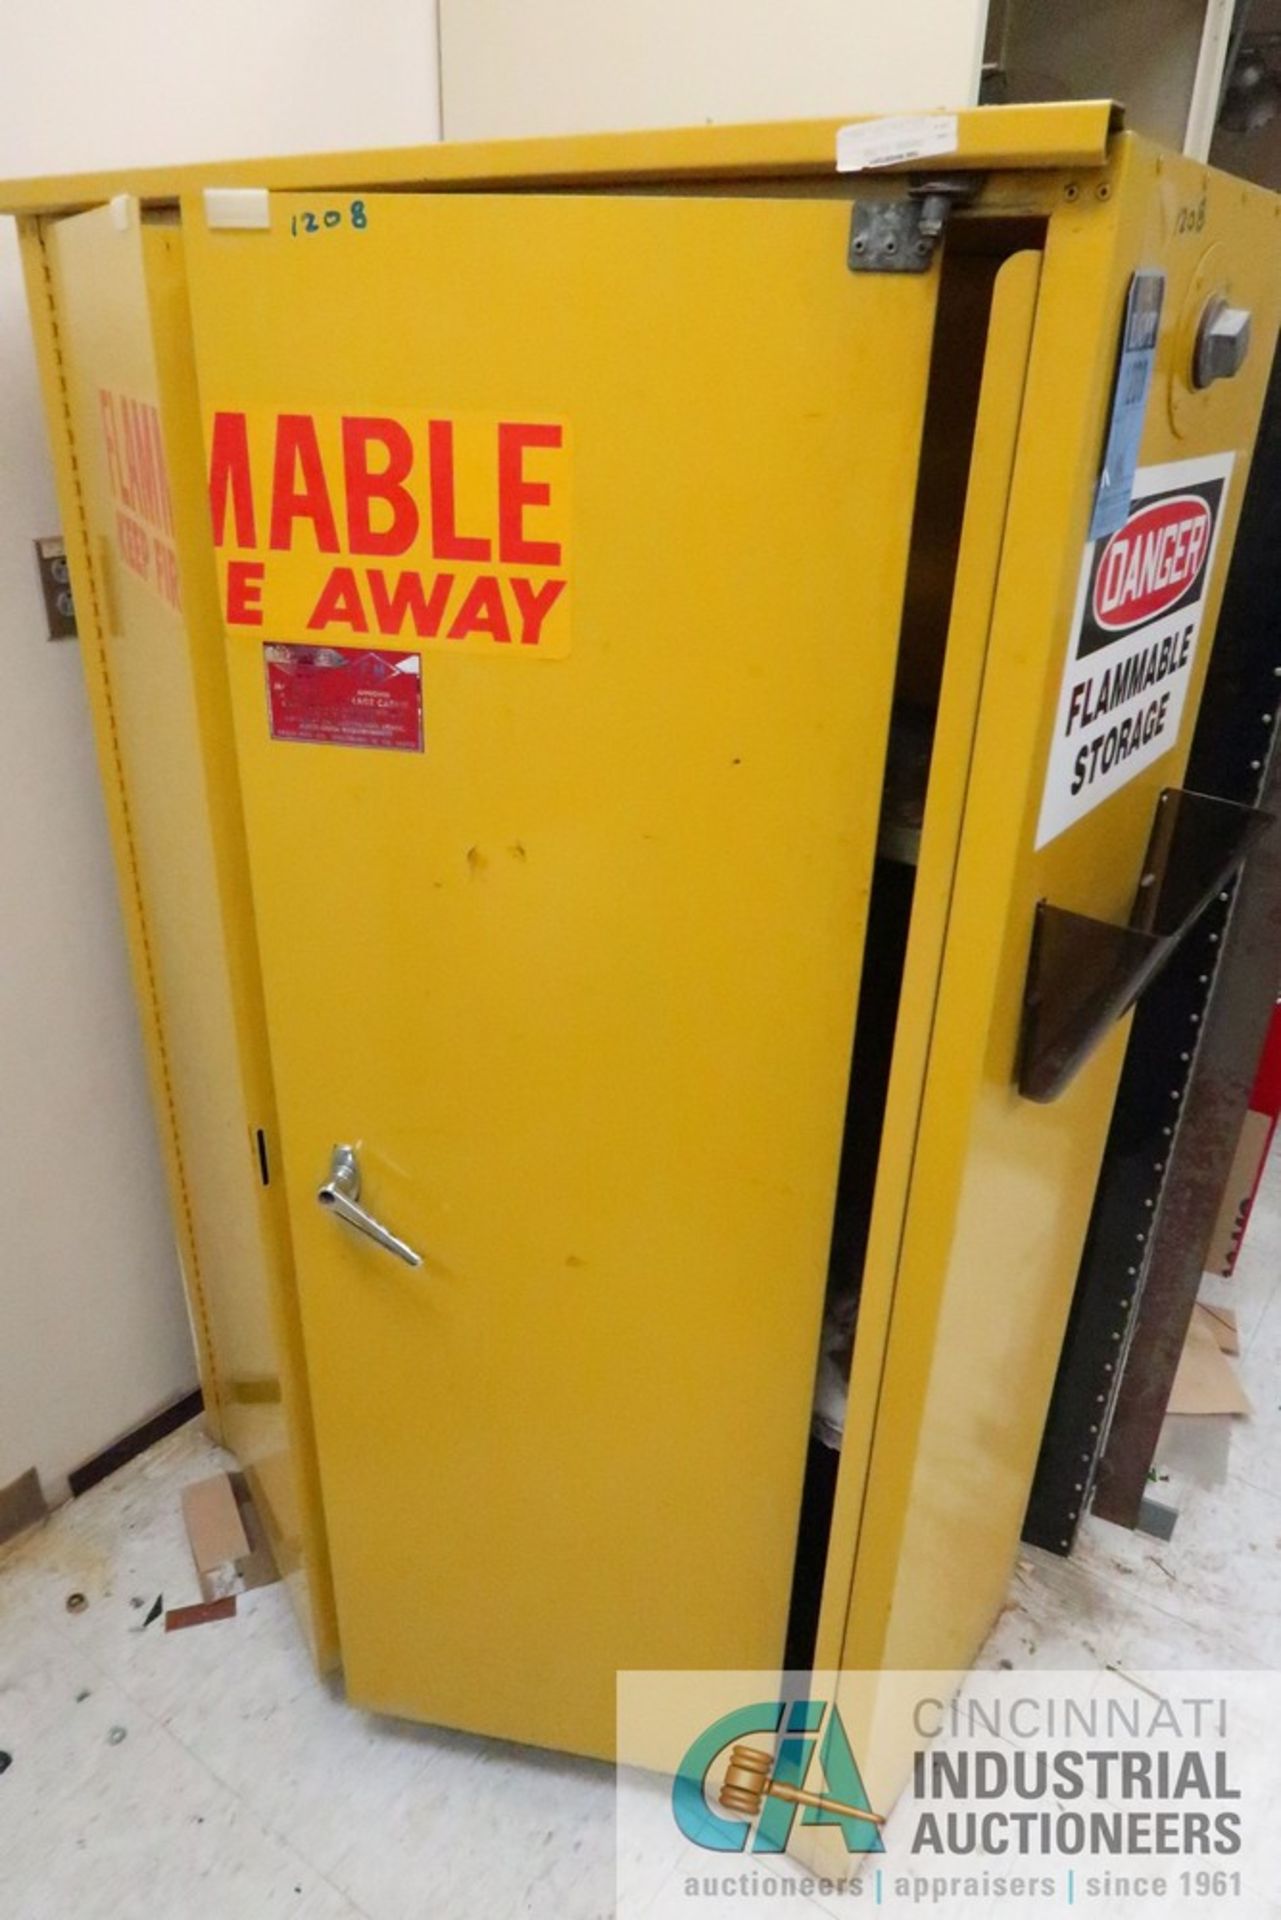 45 GALLON EAGLE MODEL 1945 FLAMMABLE STORAGE CABINET (ROOM 2283B) - Located on 2nd floor